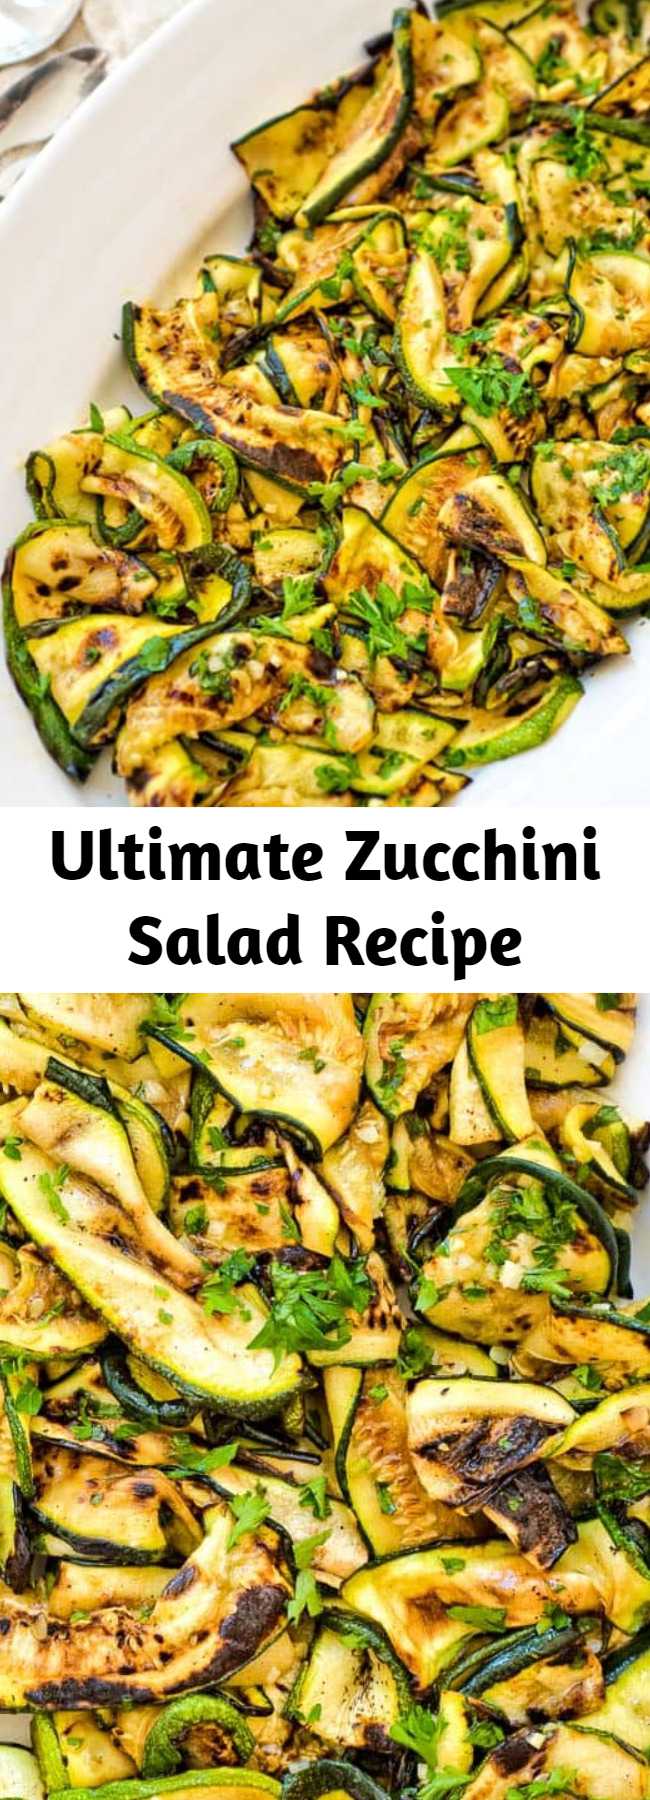 Ultimate Zucchini Salad Recipe - This Roasted Zucchini Salad is so flavorful and healthy, you’ll want to make it over and over again! Seasoned with lemon-parsley dressing, it requires only 5 ingredients! #zucchini #vegan #healthy #salad